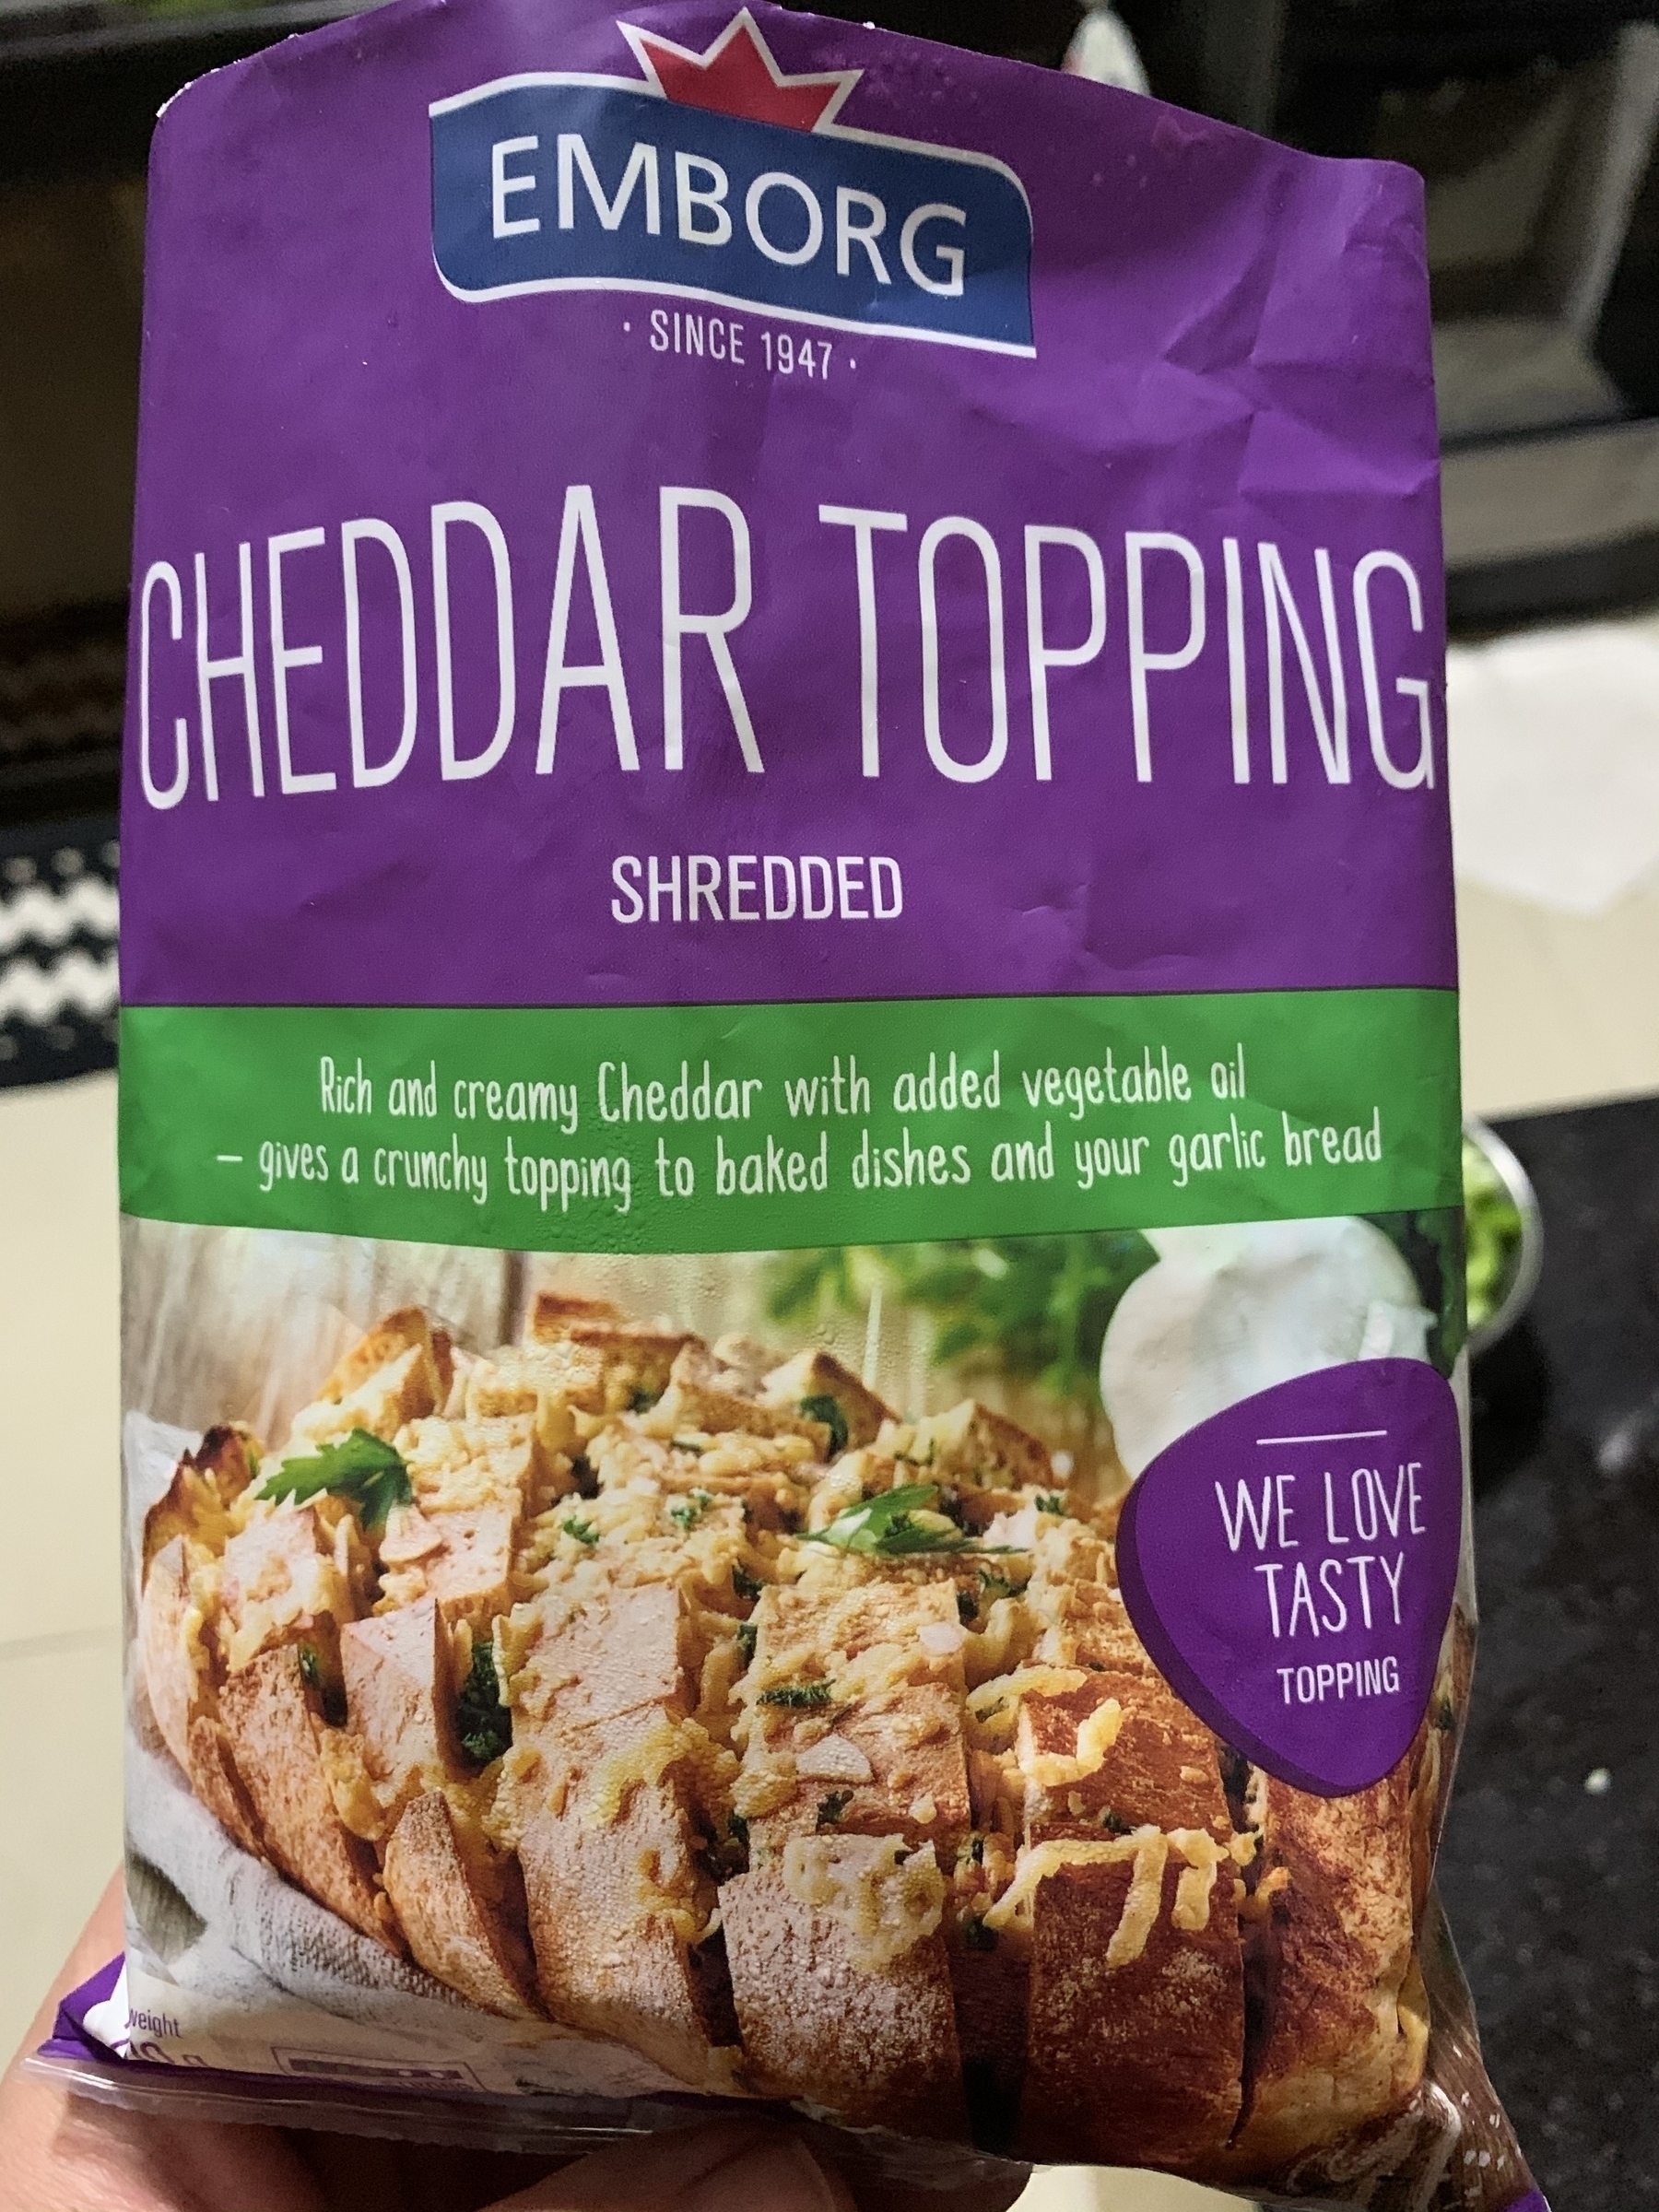 Cheddar topping for our pizzas